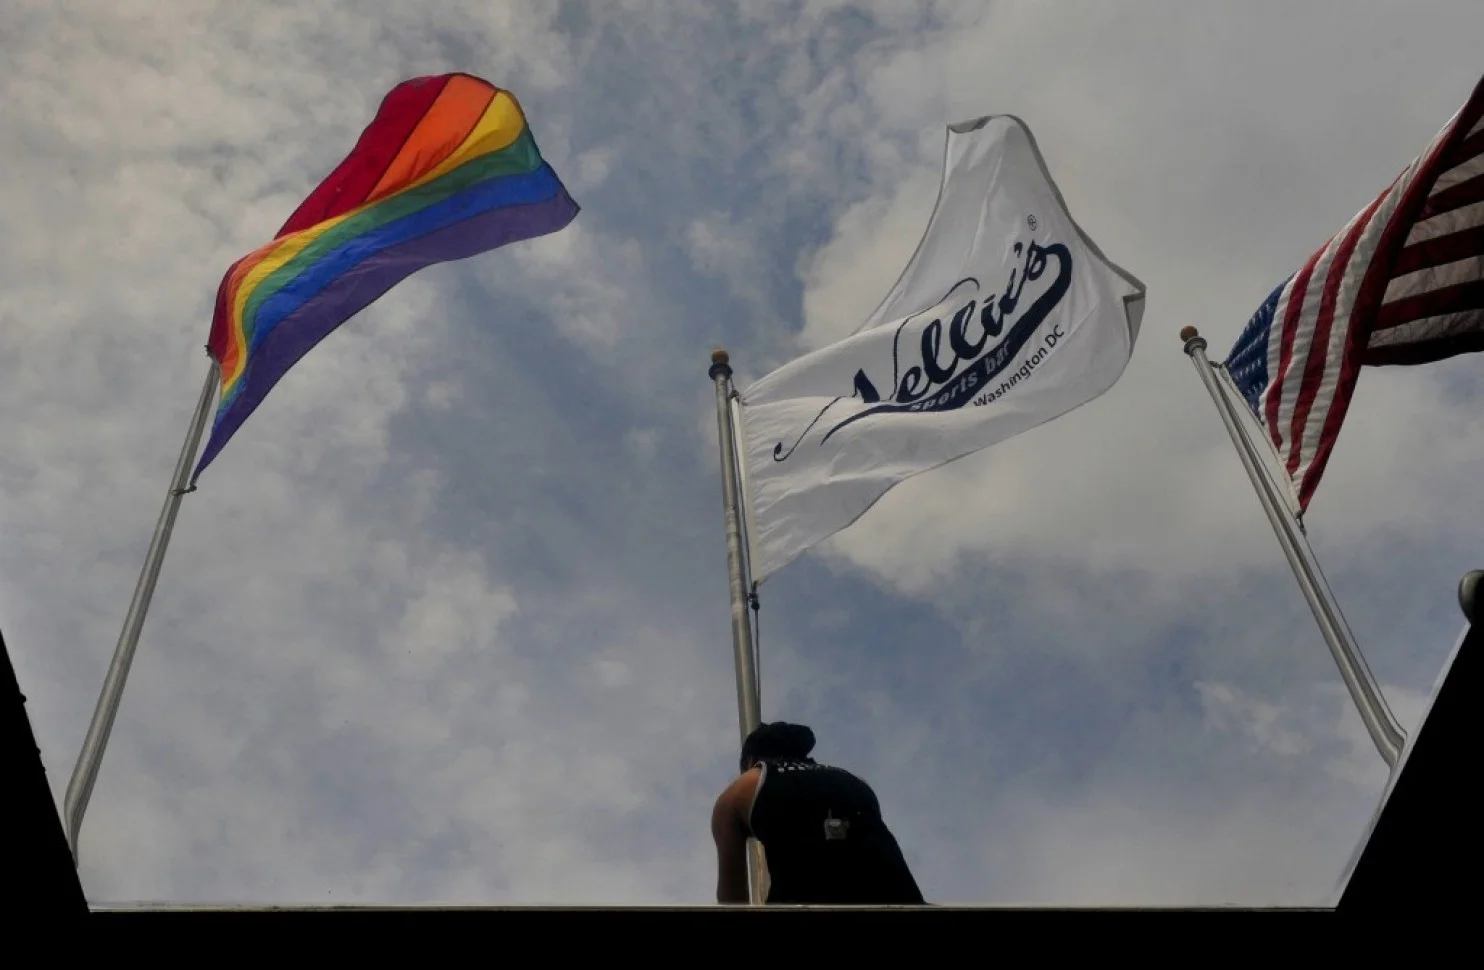 At Nellie’s Sports Bar, Drew Hilton raises three flags on the roof as the bar opened early on Friday to celebrate the Supreme Court’s decision. (Michael S. Williamson/The Washington Post)